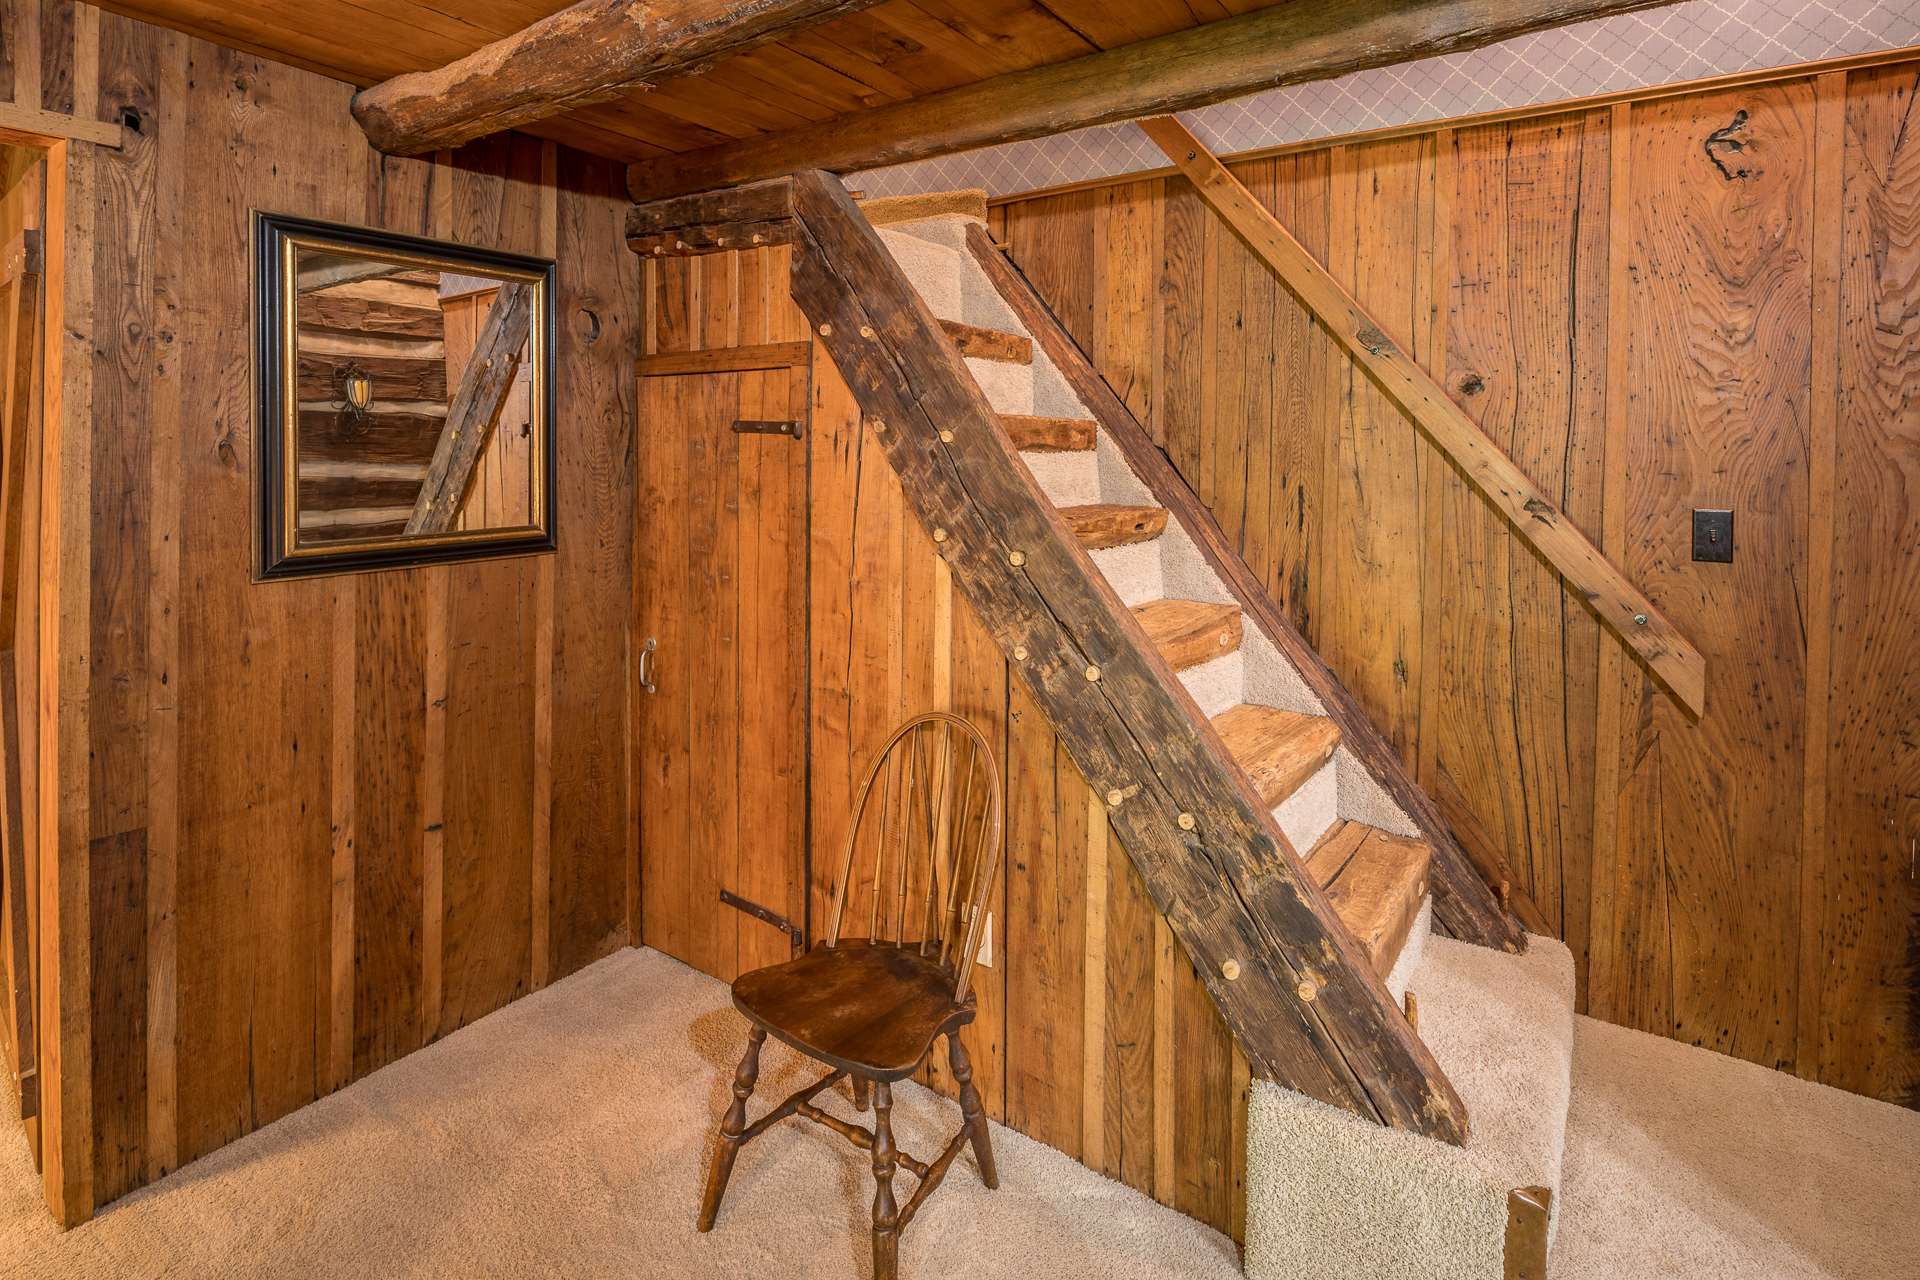 Second set of original hand-hewn stairs leading to the third bedroom - formerly a hayloft of the circa 1848 barn